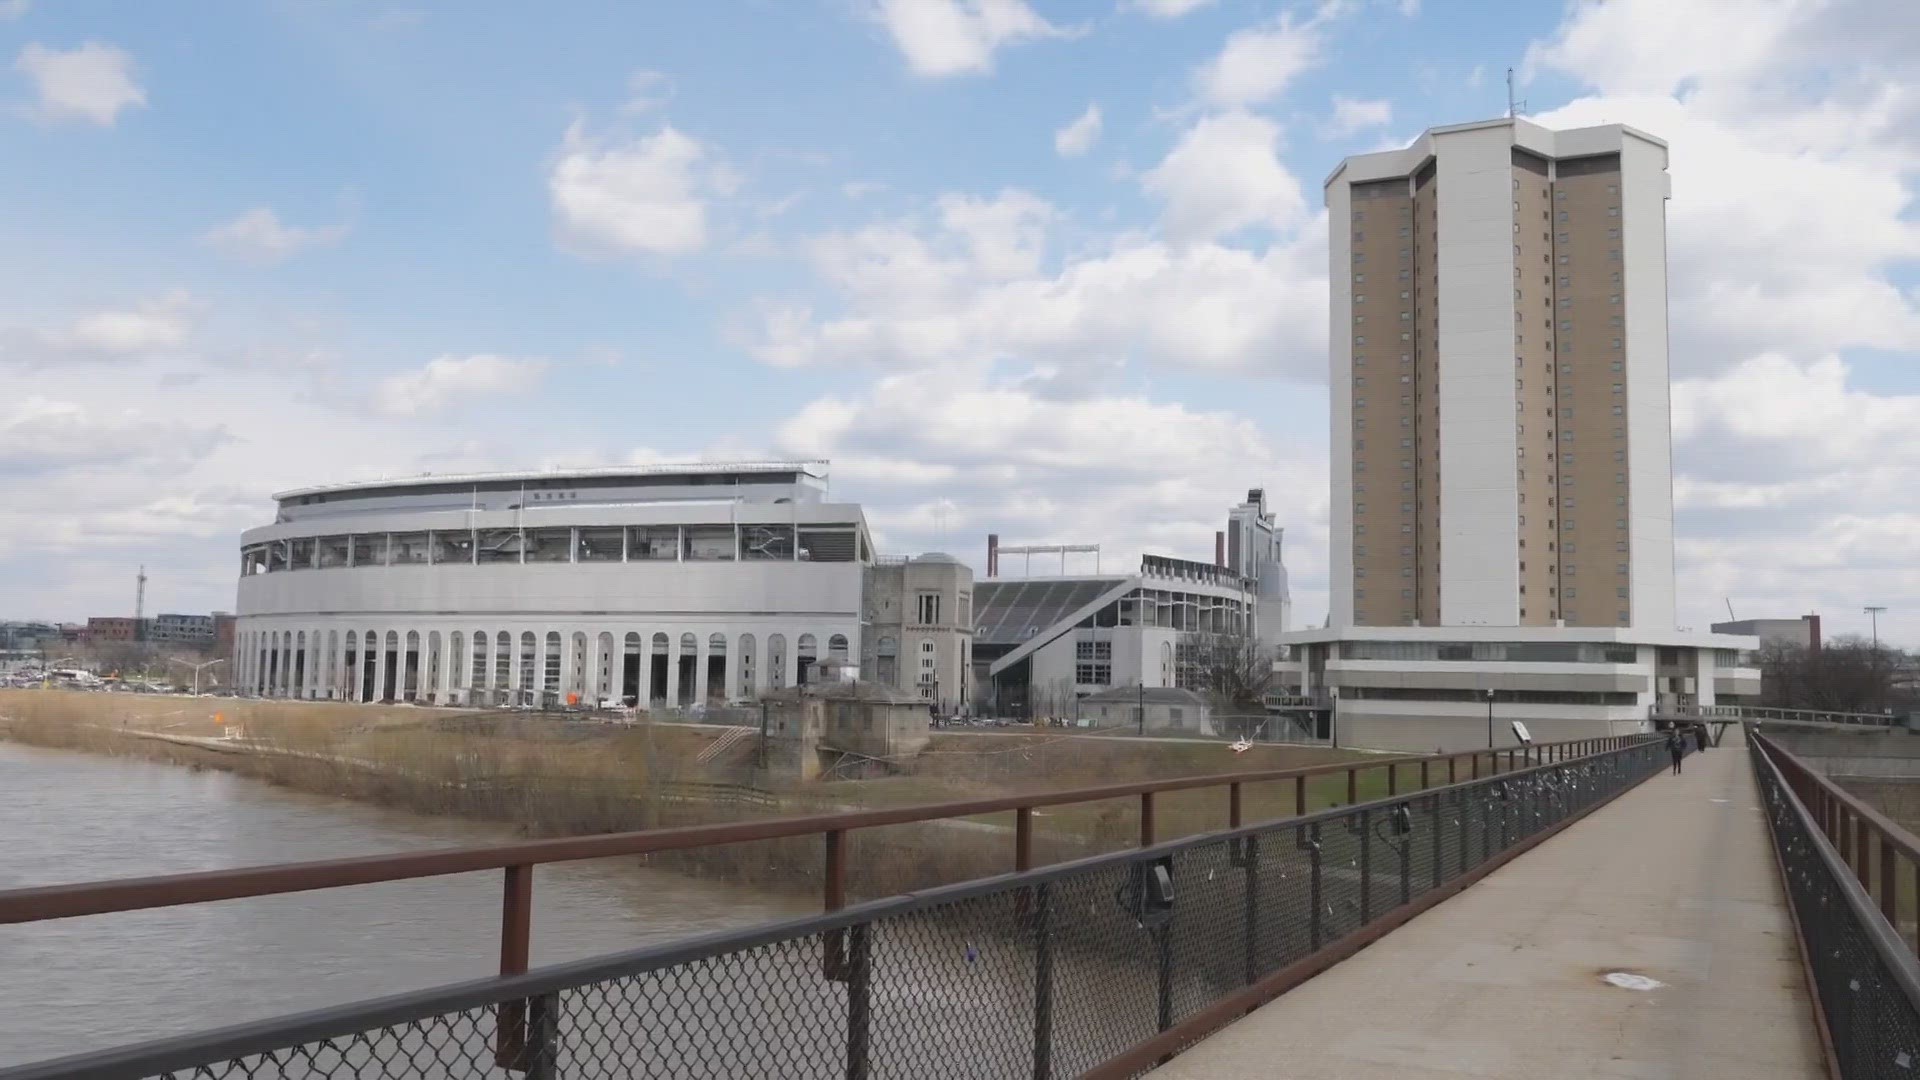 "The Drake" is closing as The Ohio State University's Wexner Medical Center expands along the Olentangy River.